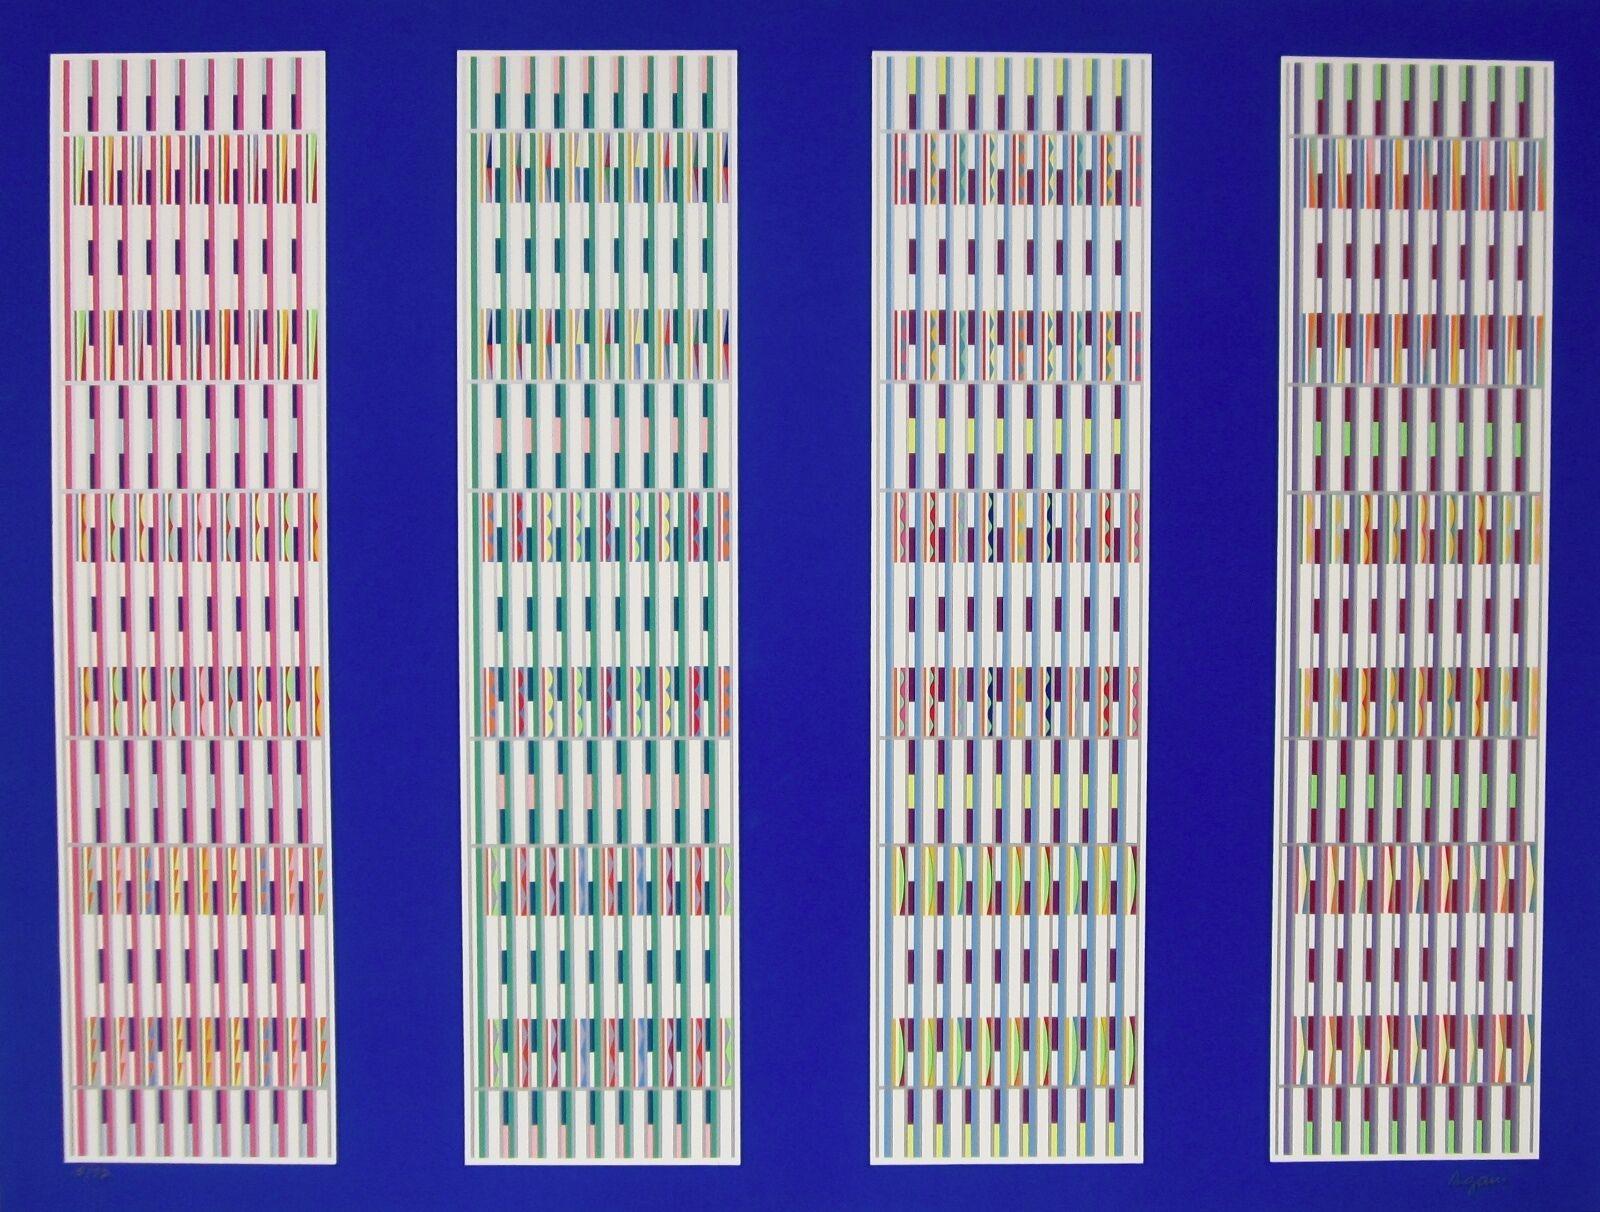 Artist: Yaakov Agam (1928)
Title: Five Visual Orchestrations
Year: 1990
Medium: Silkscreen on Arches paper
Edition: 12/72, plus proofs
Size: 30.25 x 42 inches
Condition: Good
Inscription: Signed and numbered by the artist.
Notes: Published by